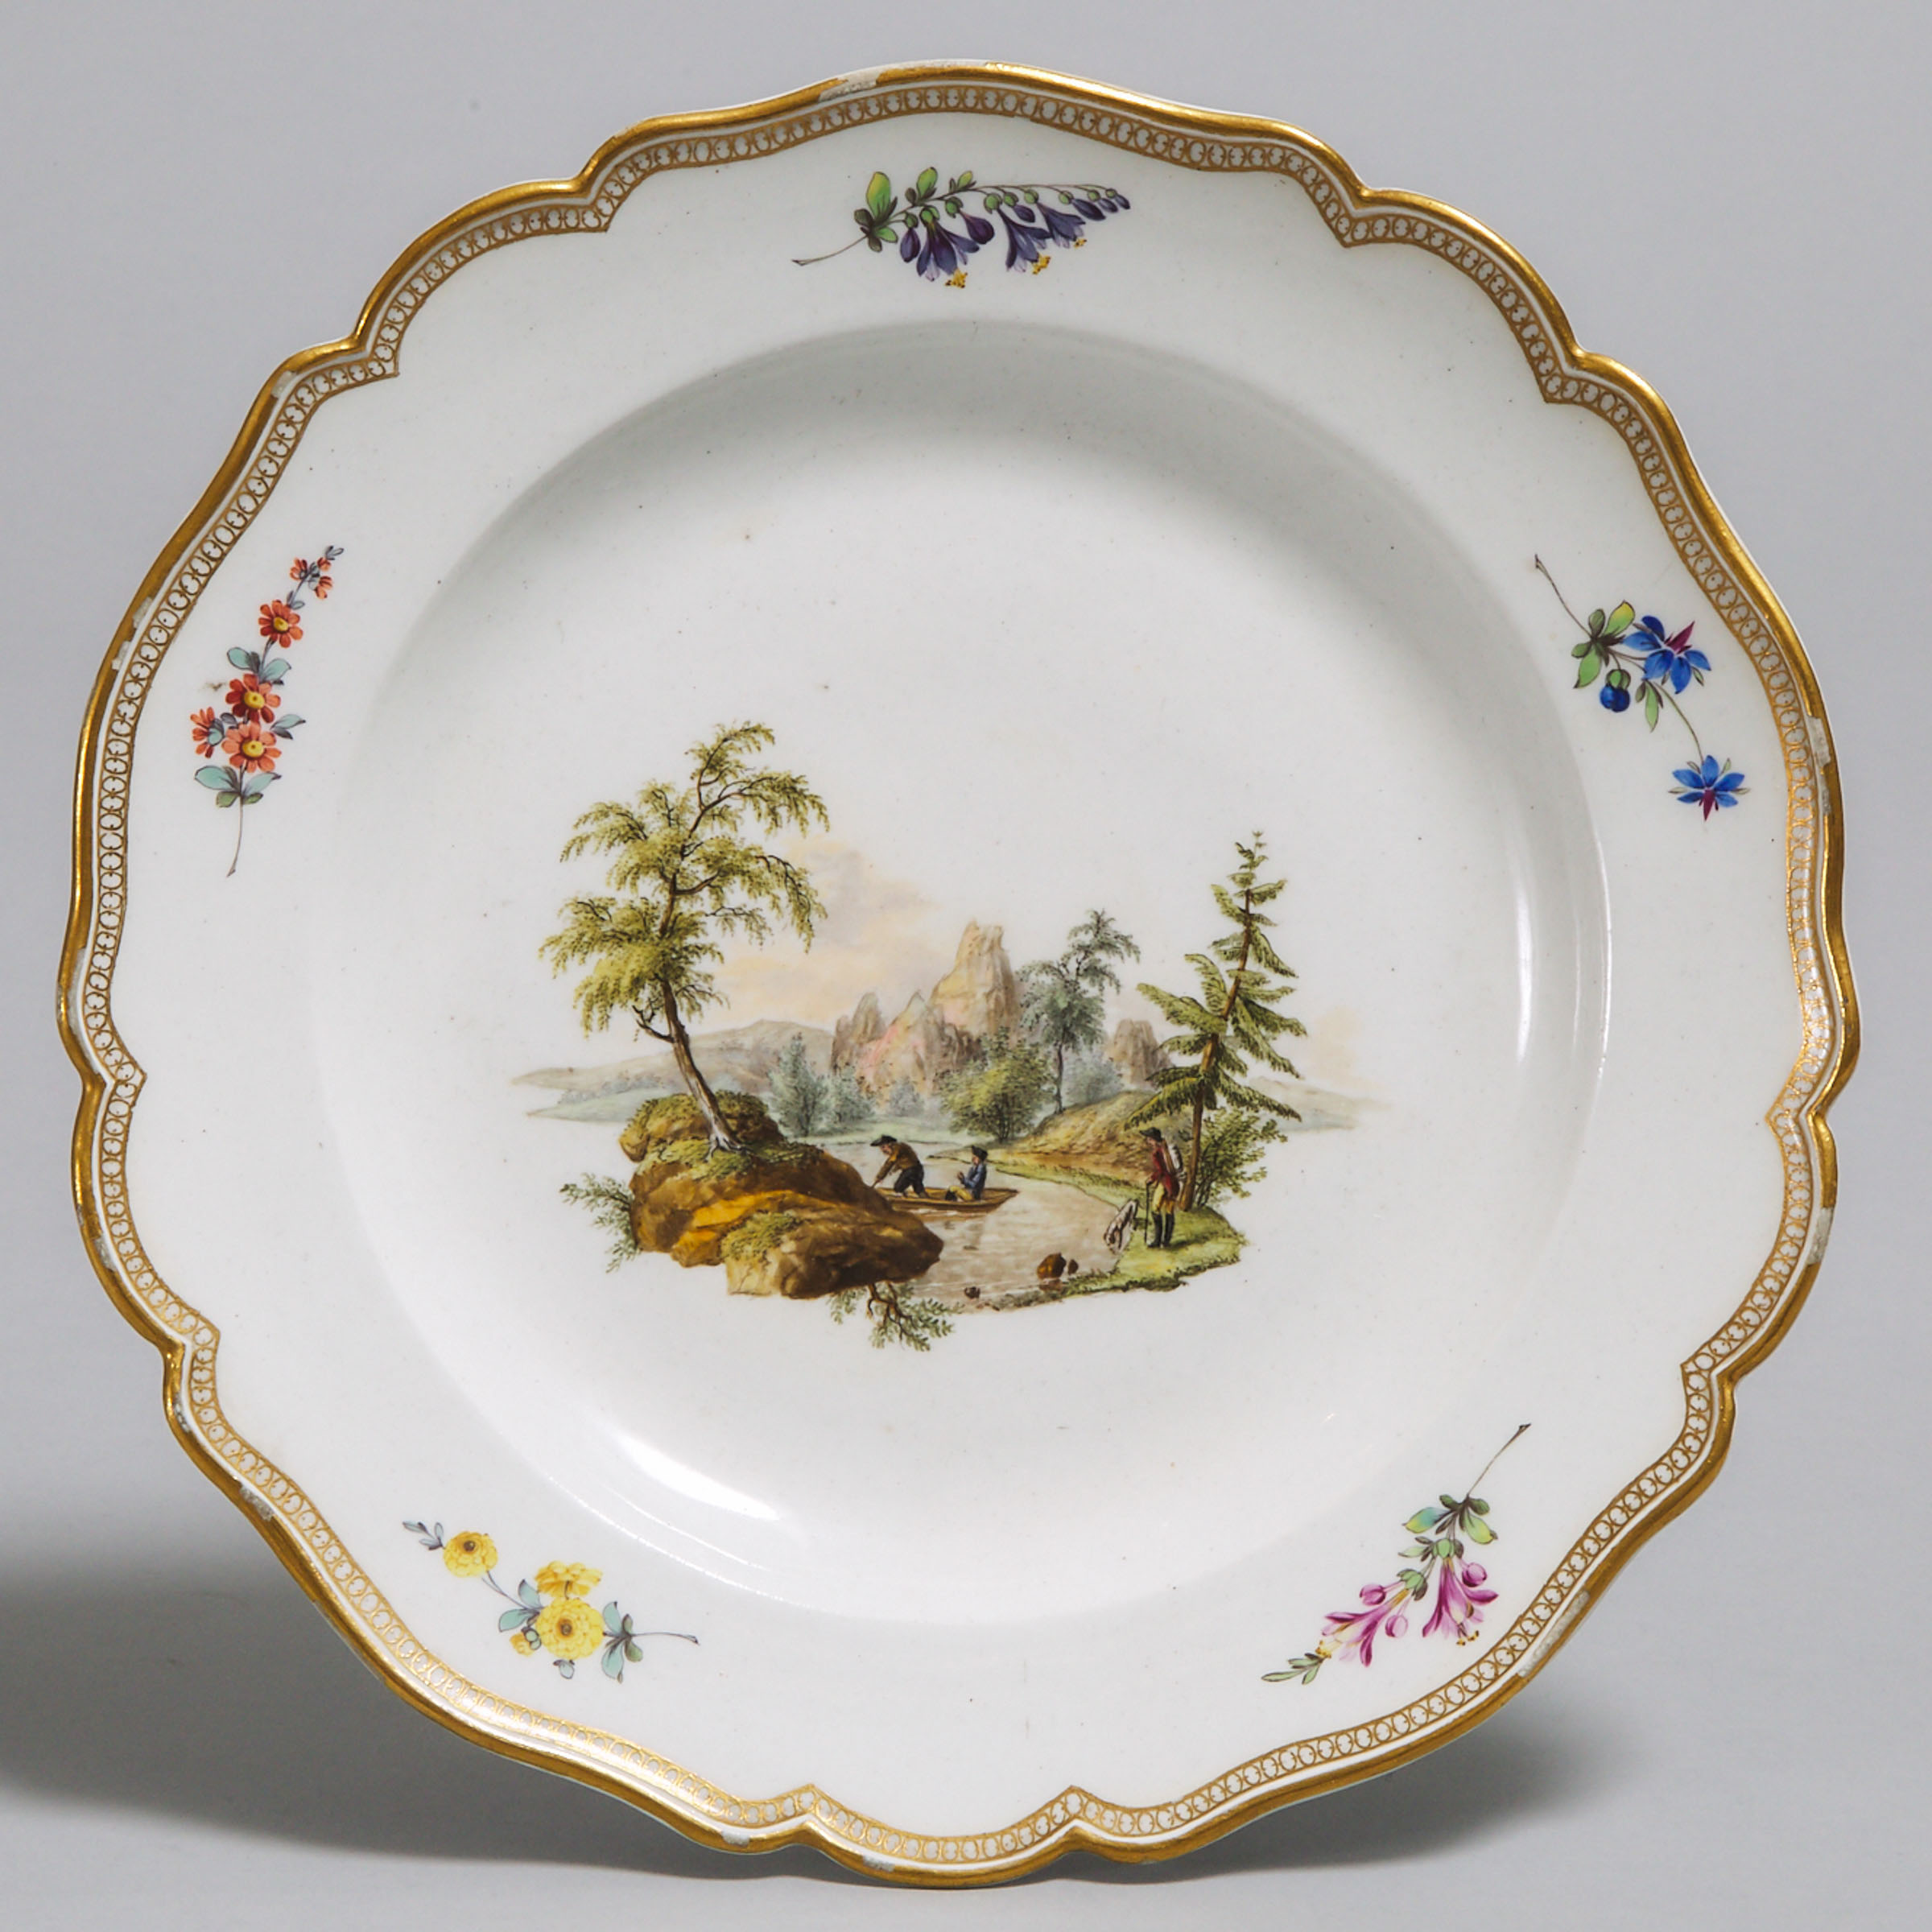 Meissen Painted Boating Scene Plate, early 19th century